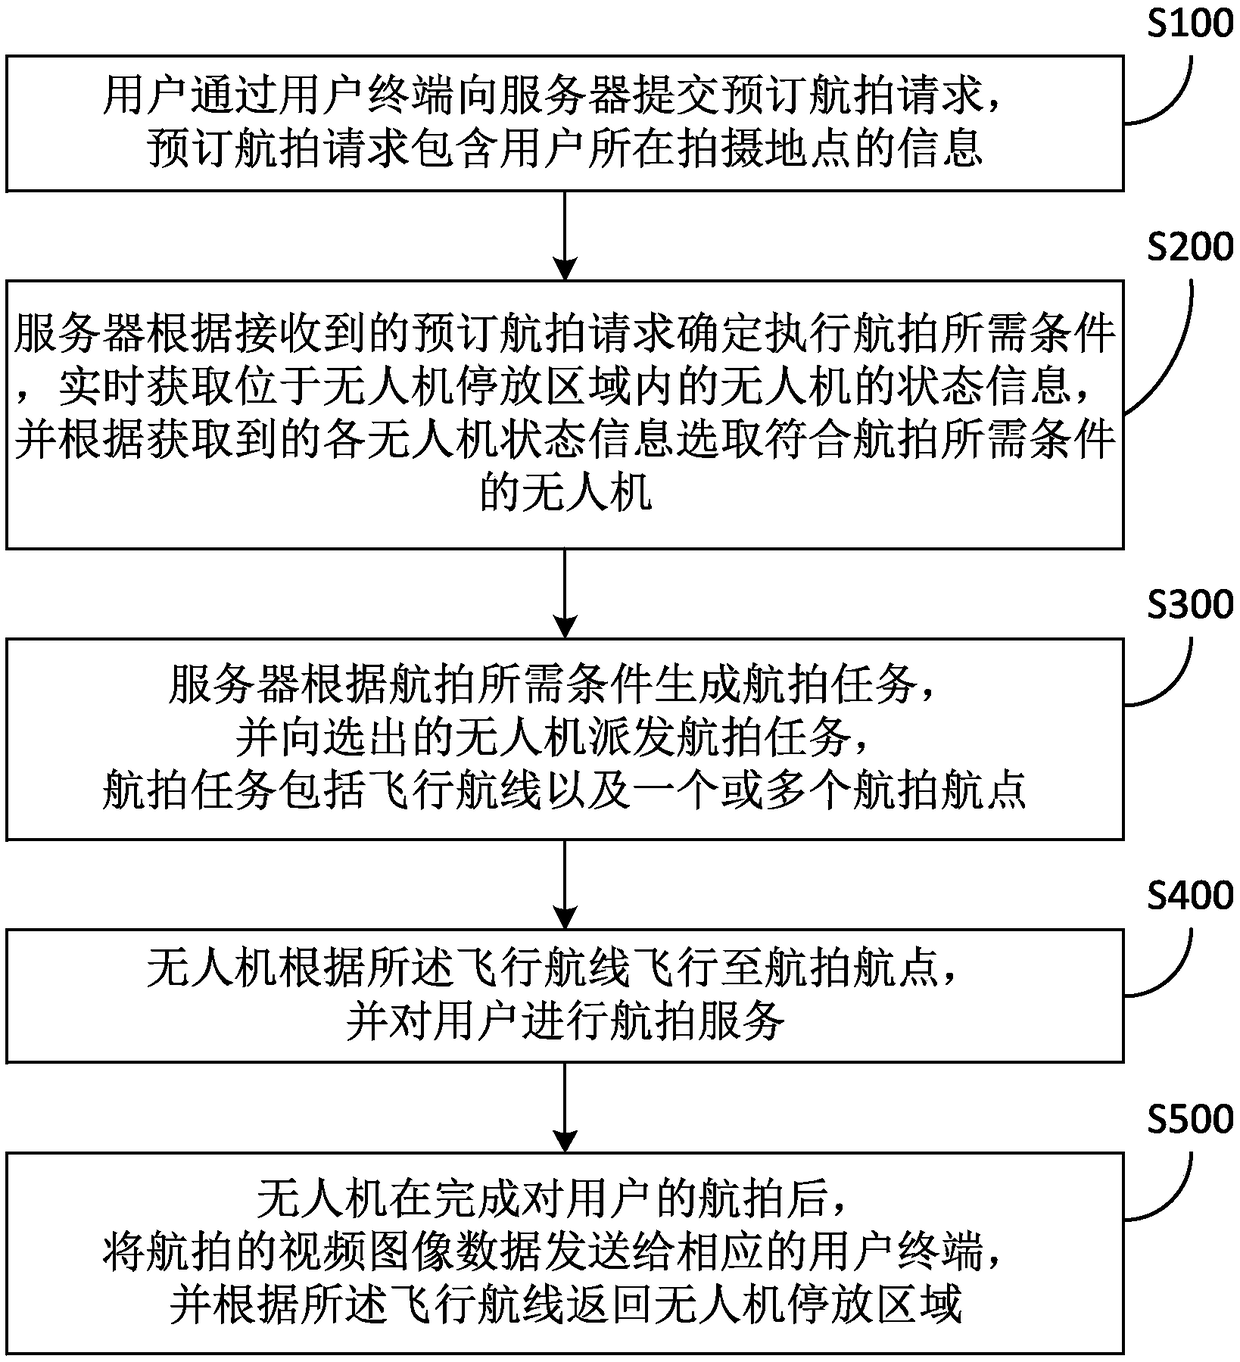 Unmanned aerial vehicle reservation aerial photographing method and system based on user reservation and automatic control